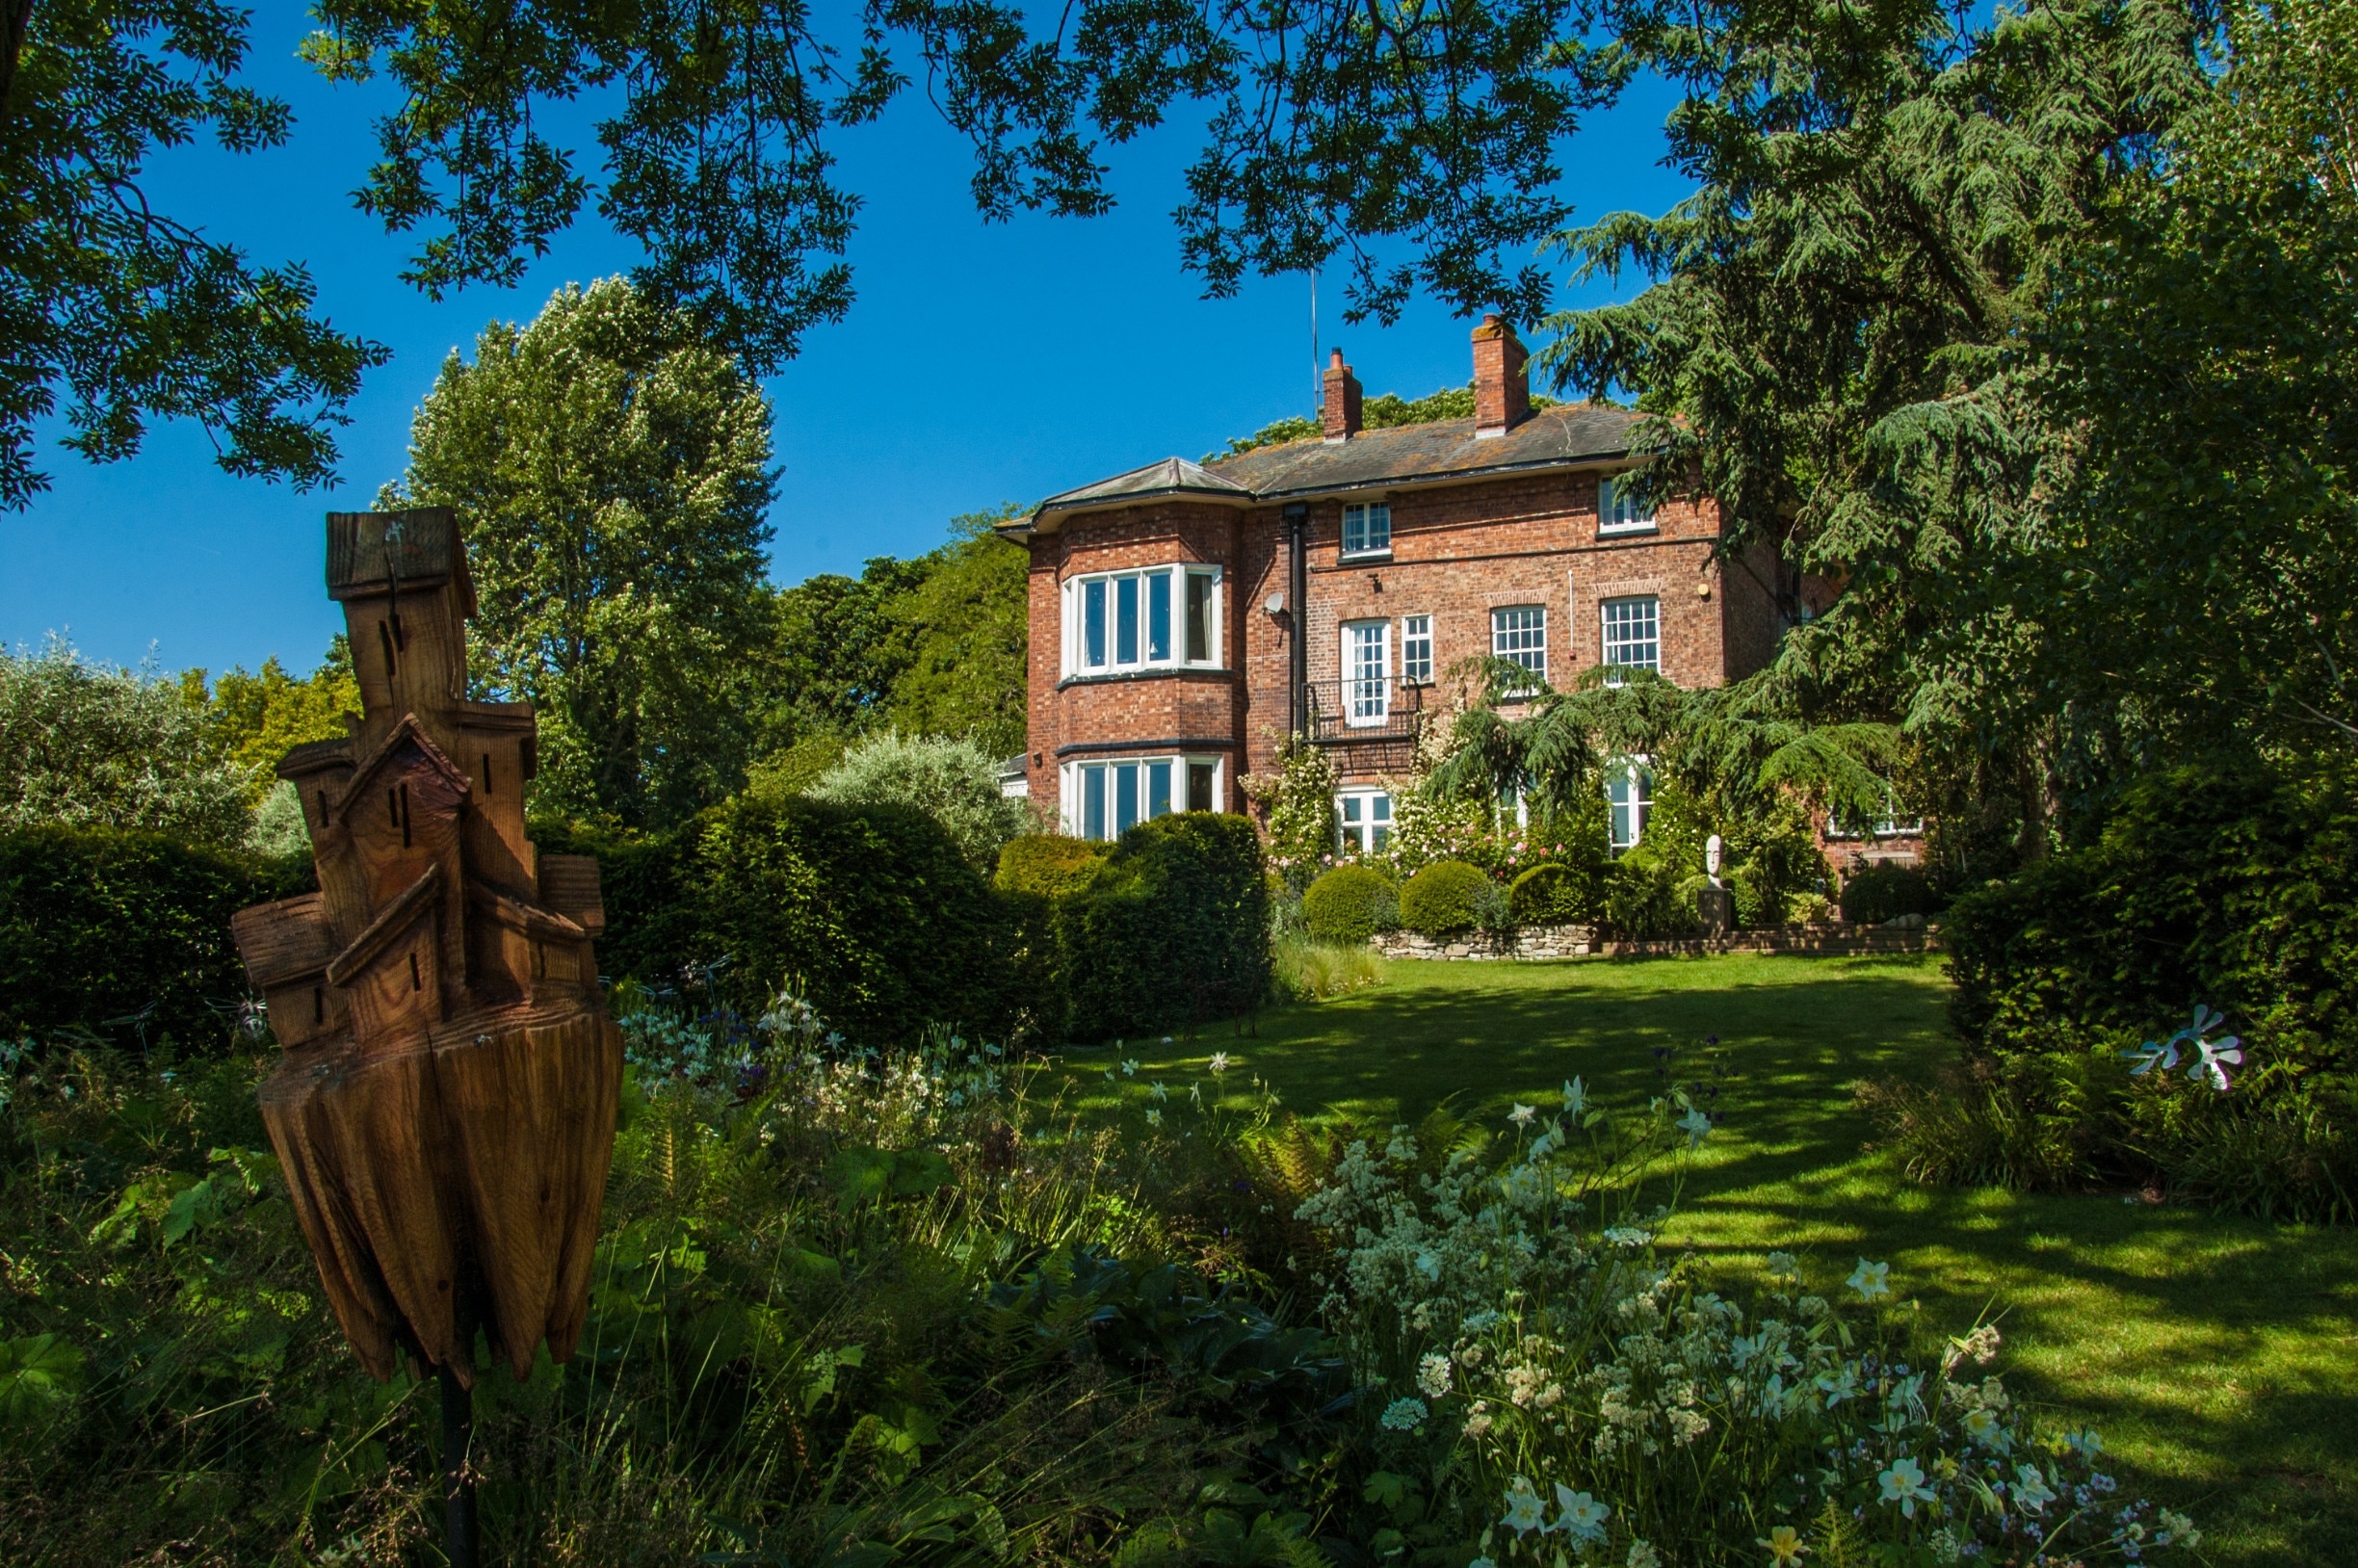 A privately-owned house and garden sculptures close to Tewkesbury. The Affordable Garden Art Exhibition showcases the work of many local sculptors with more than 80 exhibits in a wide range of media.
http://www.visittewkesbury.info/whats-on/showborough-house-sculpture-garden/
More Showborough shots here https://www.flickr.com/photos/wychepics/albums/72157684247078146